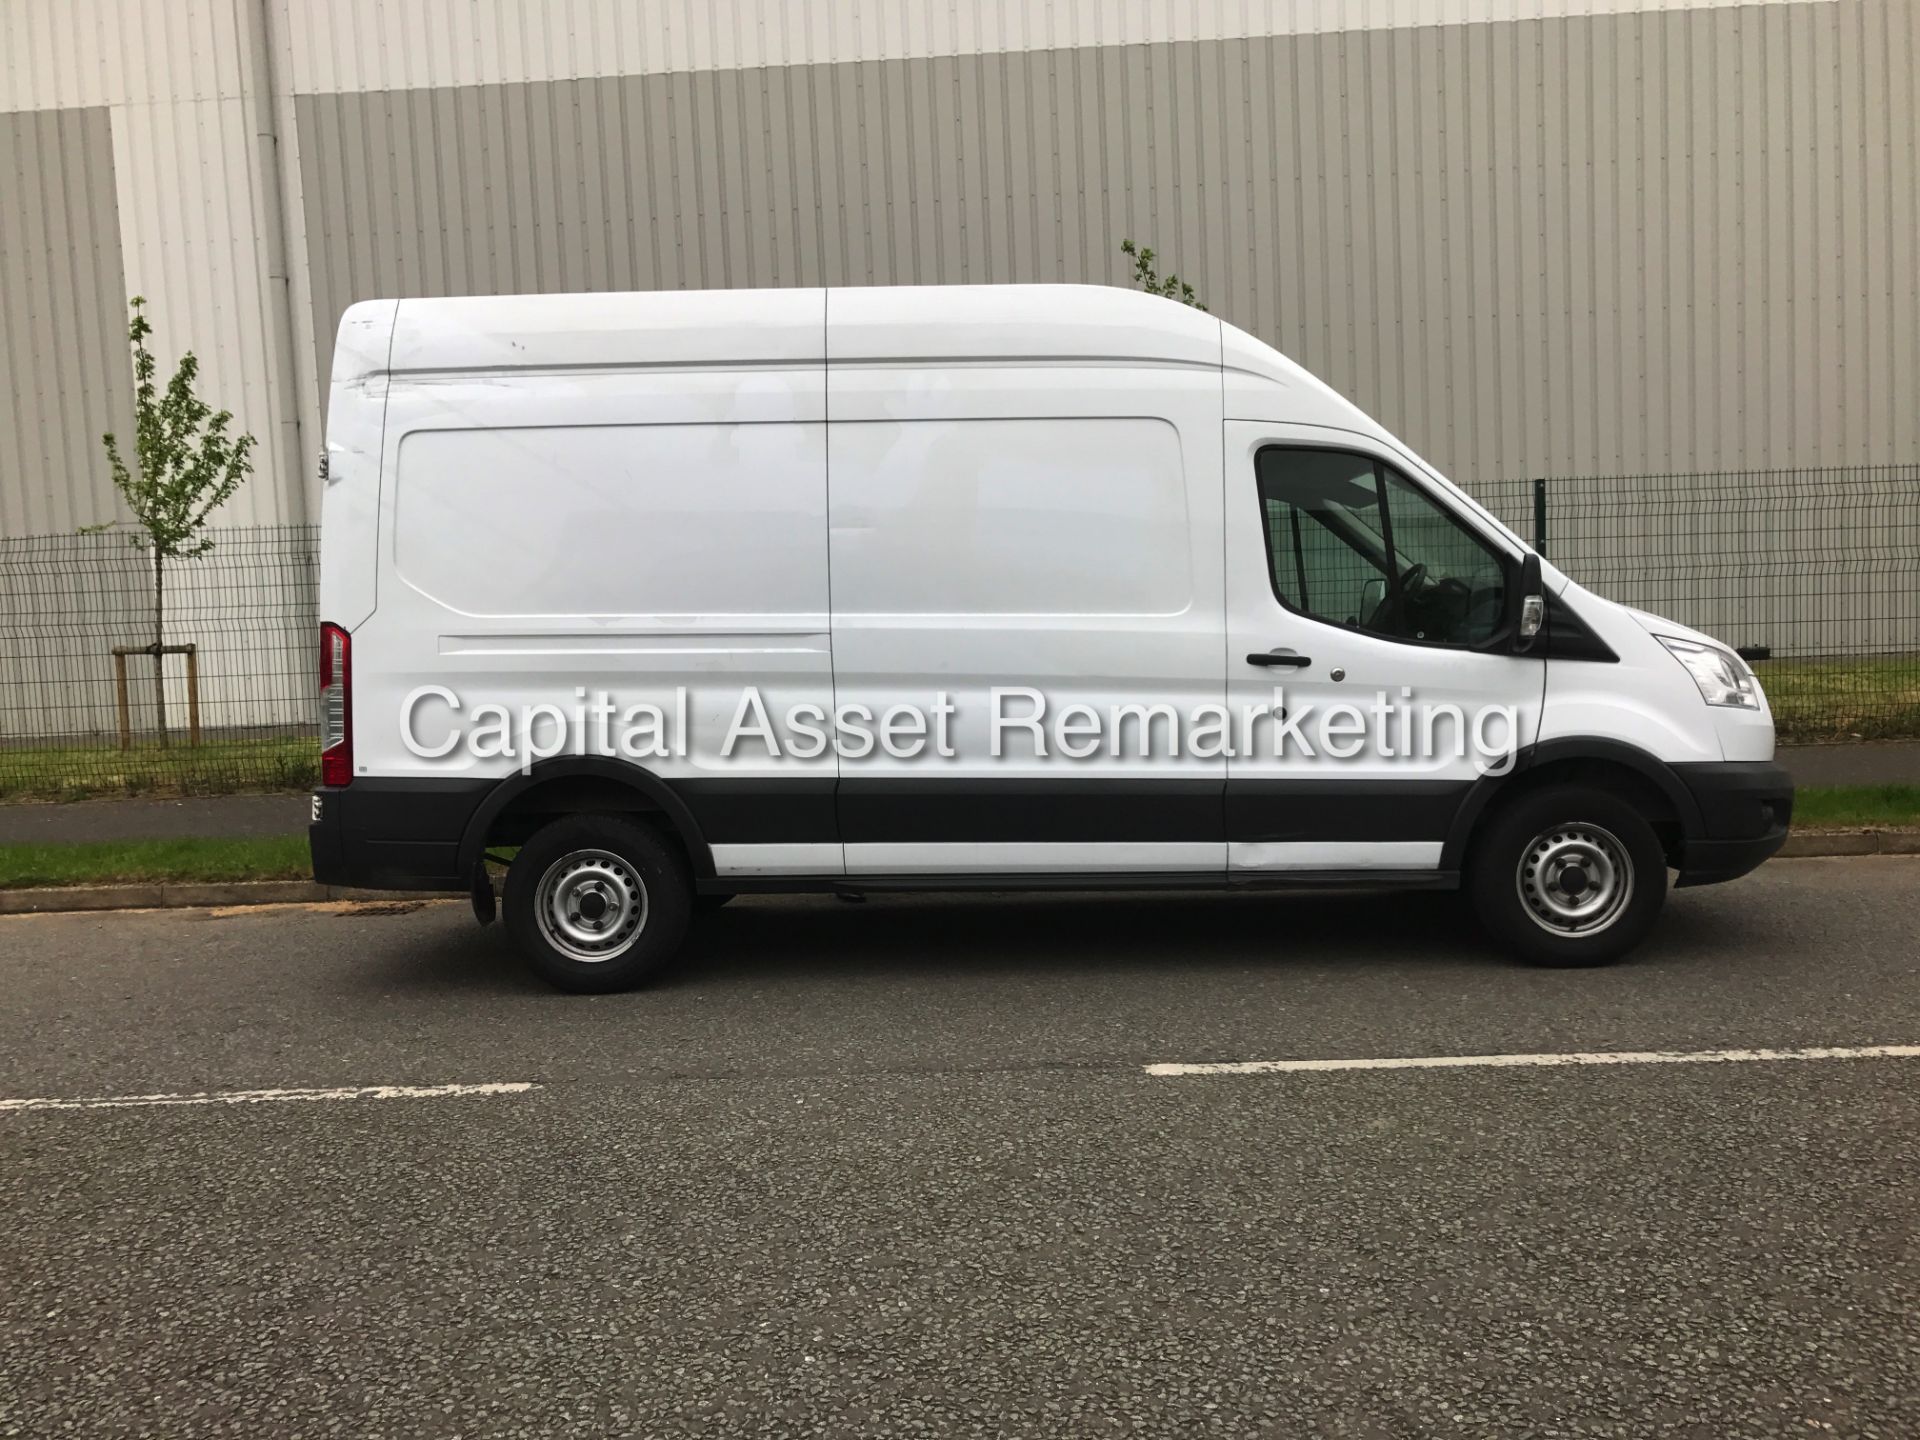 (ON SALE) FORD TRANSIT 2.2TDCI "125BHP - 6 SPEED" 350 LONG WHEEL BASE/ HIGH ROOF "NEW SHAPE" - Image 2 of 10